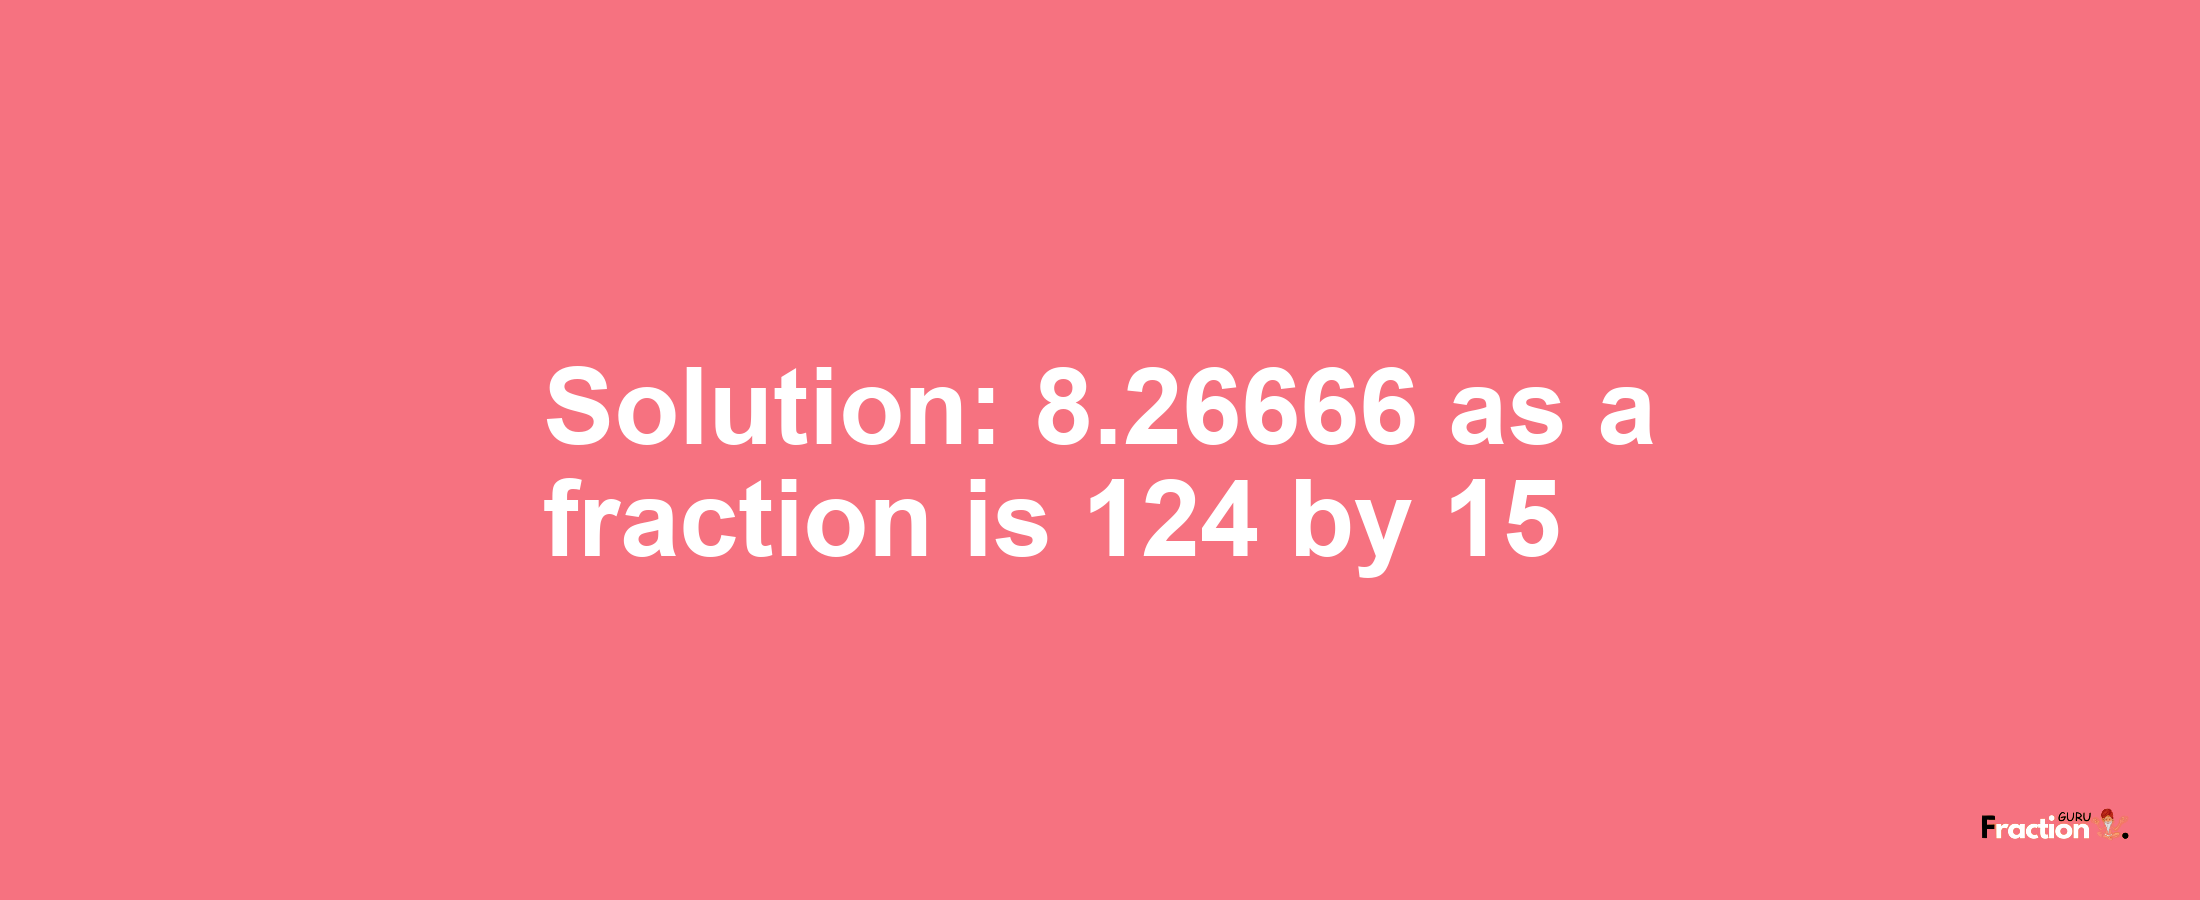 Solution:8.26666 as a fraction is 124/15